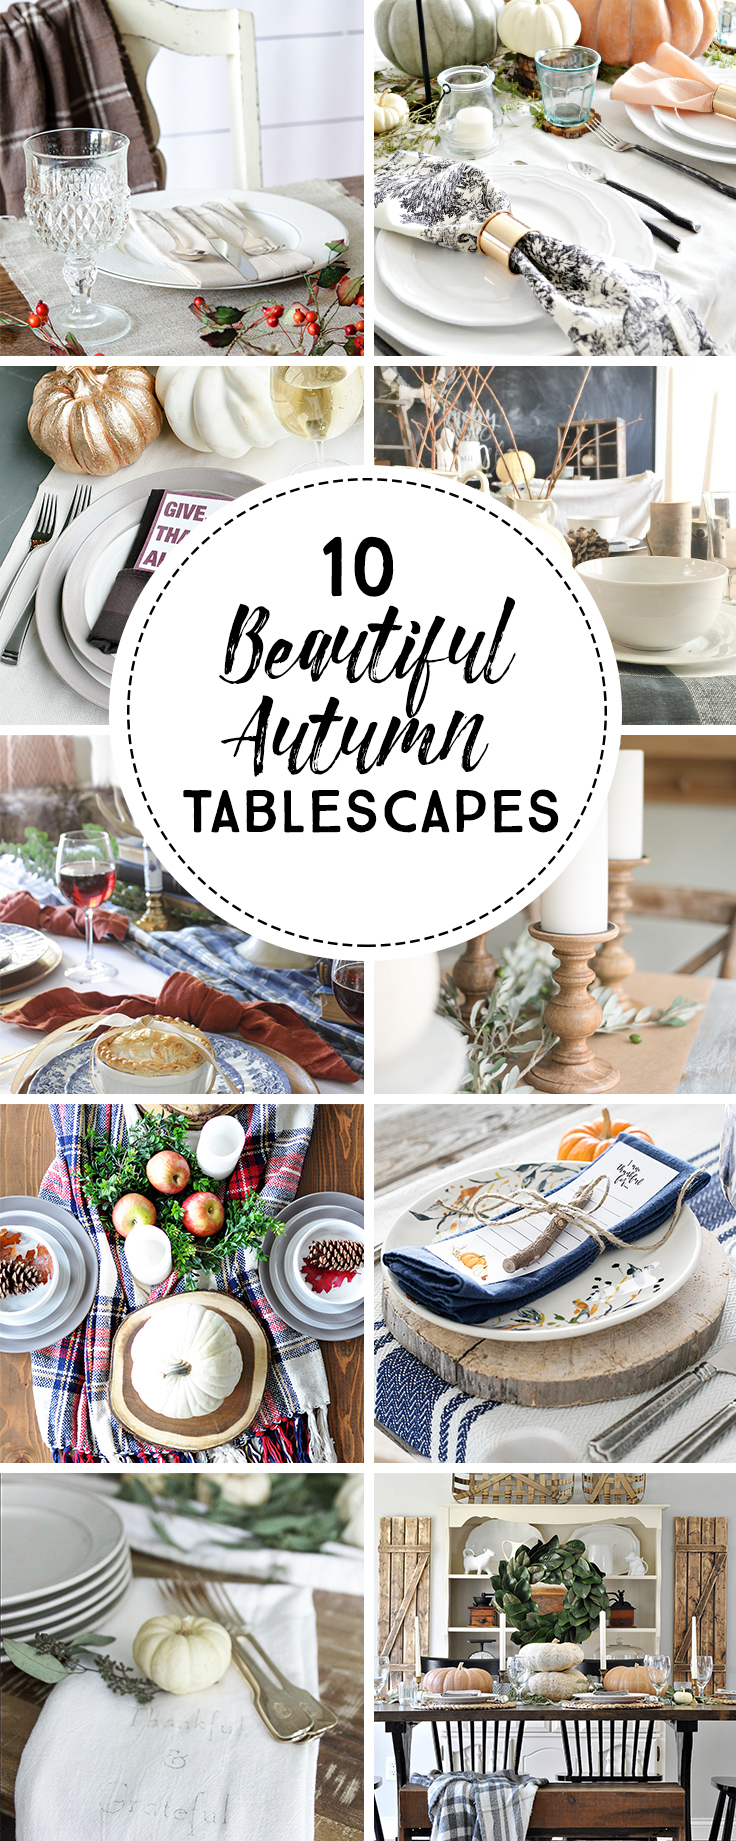 10-beautiful-autumn-tablescapes